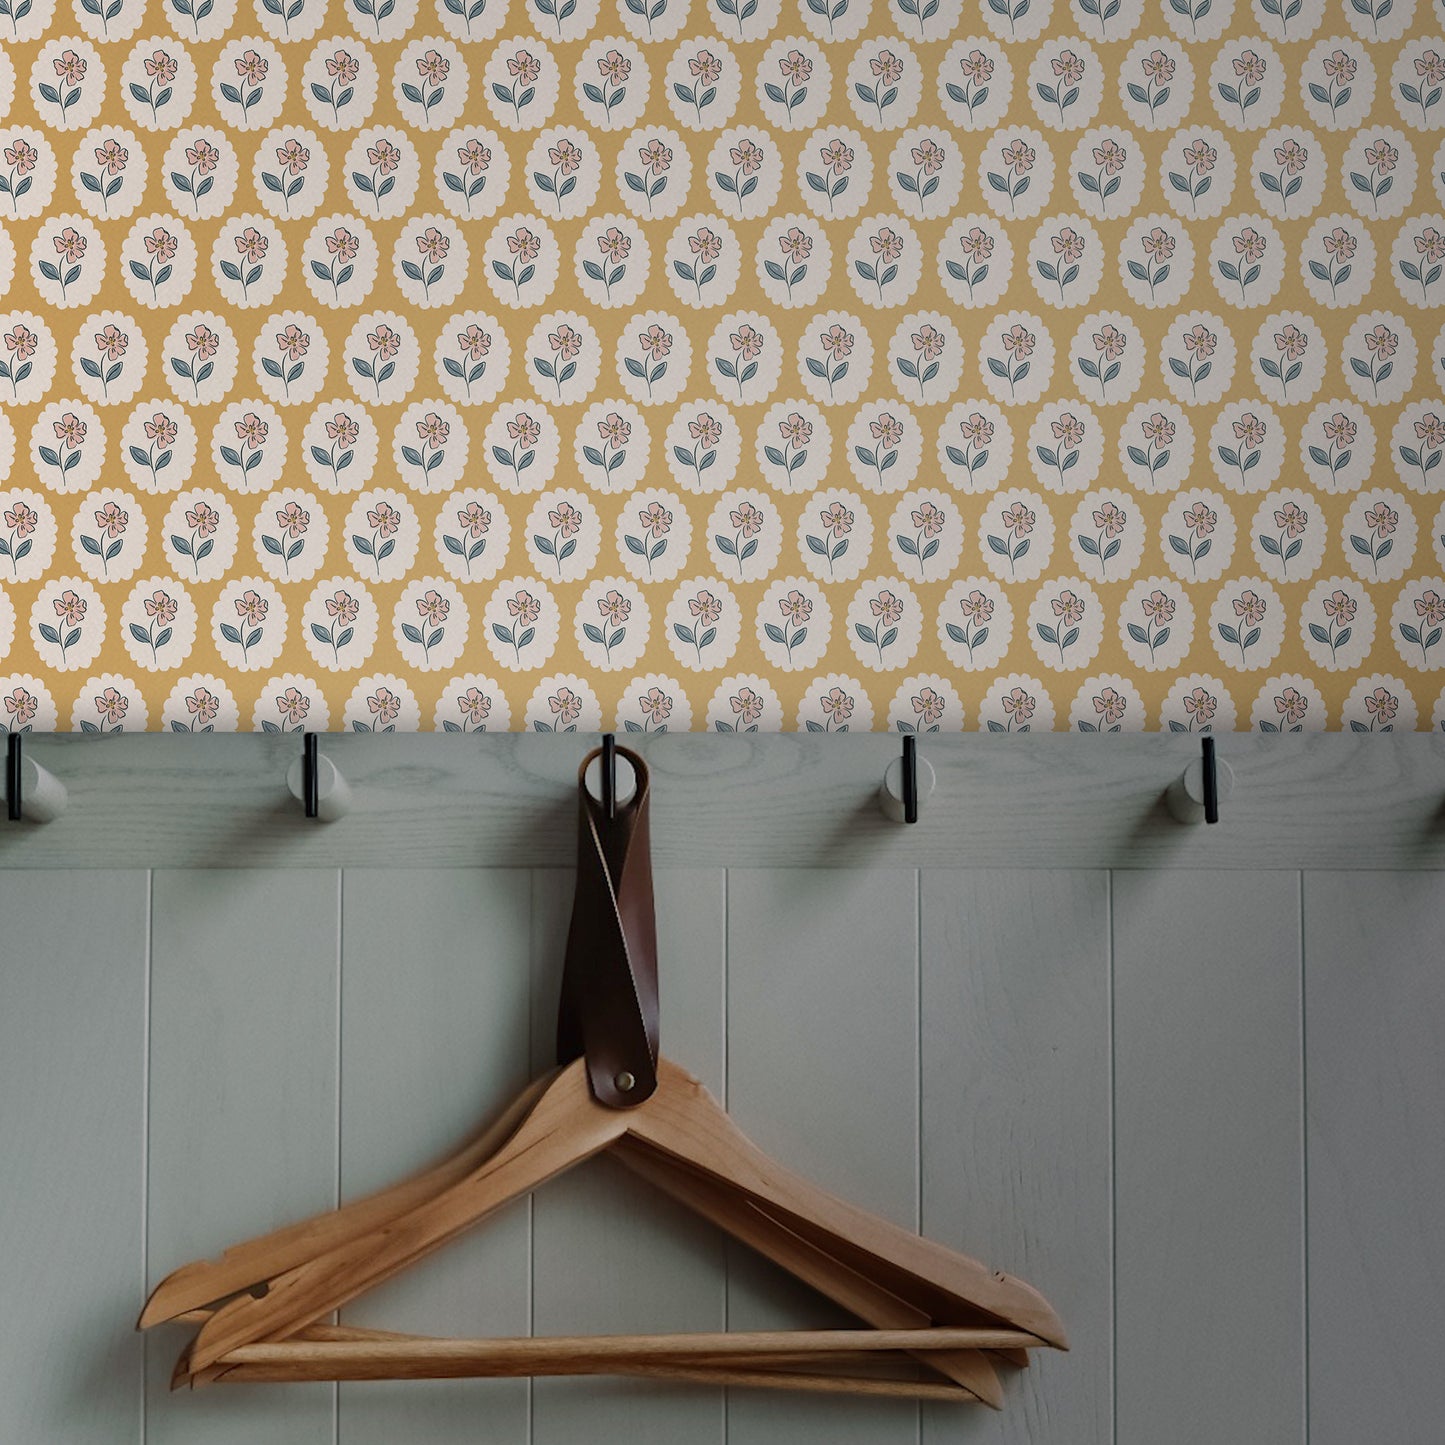 Mudroom featuring Dancing Petals Peel and Stick, Removable Wallpaper in Ochre yellow